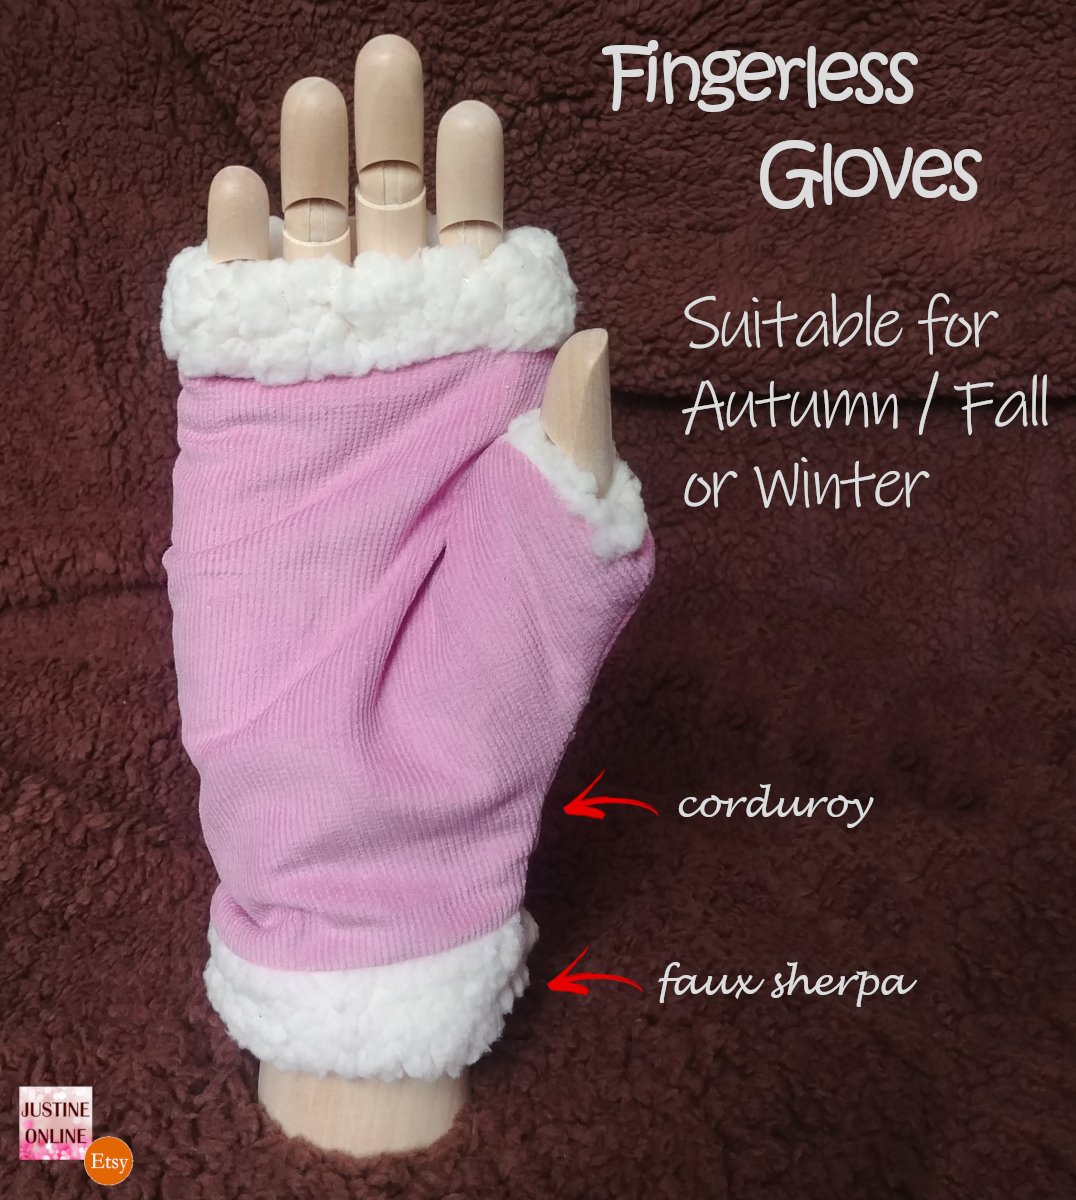 #gloves #fallgloves #autumngloves #womengloves #ladygloves #womenfashion #fauxsherpa #fingerlessgloves #corduroy Light Purple Corduroy lined with Faux Sherpa Autumn Fall Winter Keep Warm Handmade Fingerless Gloves Girls Women Fashion Accessories etsy.me/2EBOxTe via @Etsy